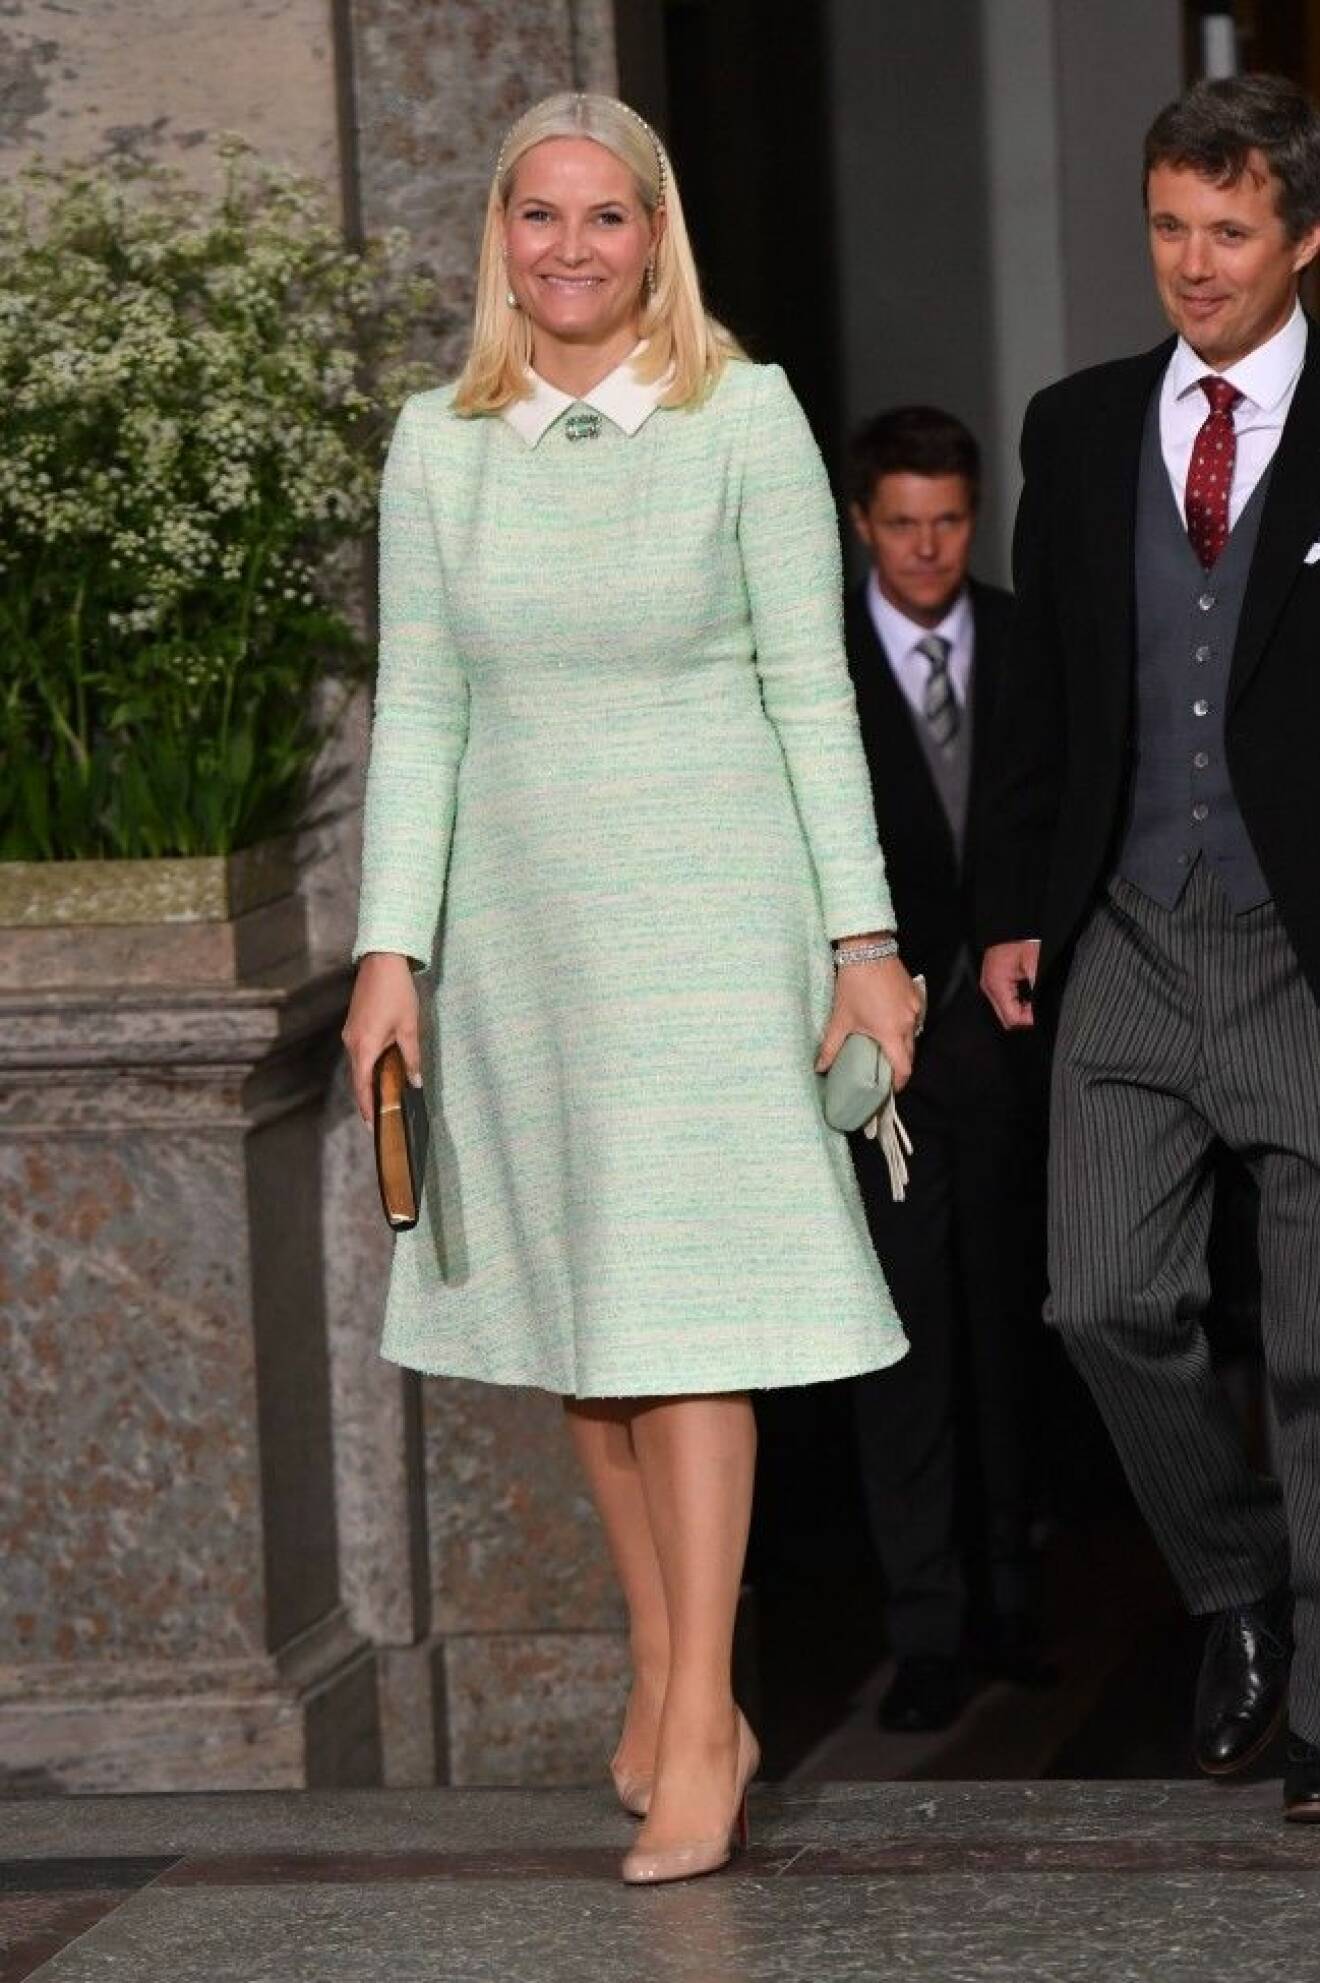 Mandatory Credit: Photo by Tim Rooke/REX/Shutterstock (5696585ag) Crown Princess Mette-Marit of Norway Prince Oscar of Sweden Christening, The Royal Palace, Stockholm, Sweden - 27 May 2016